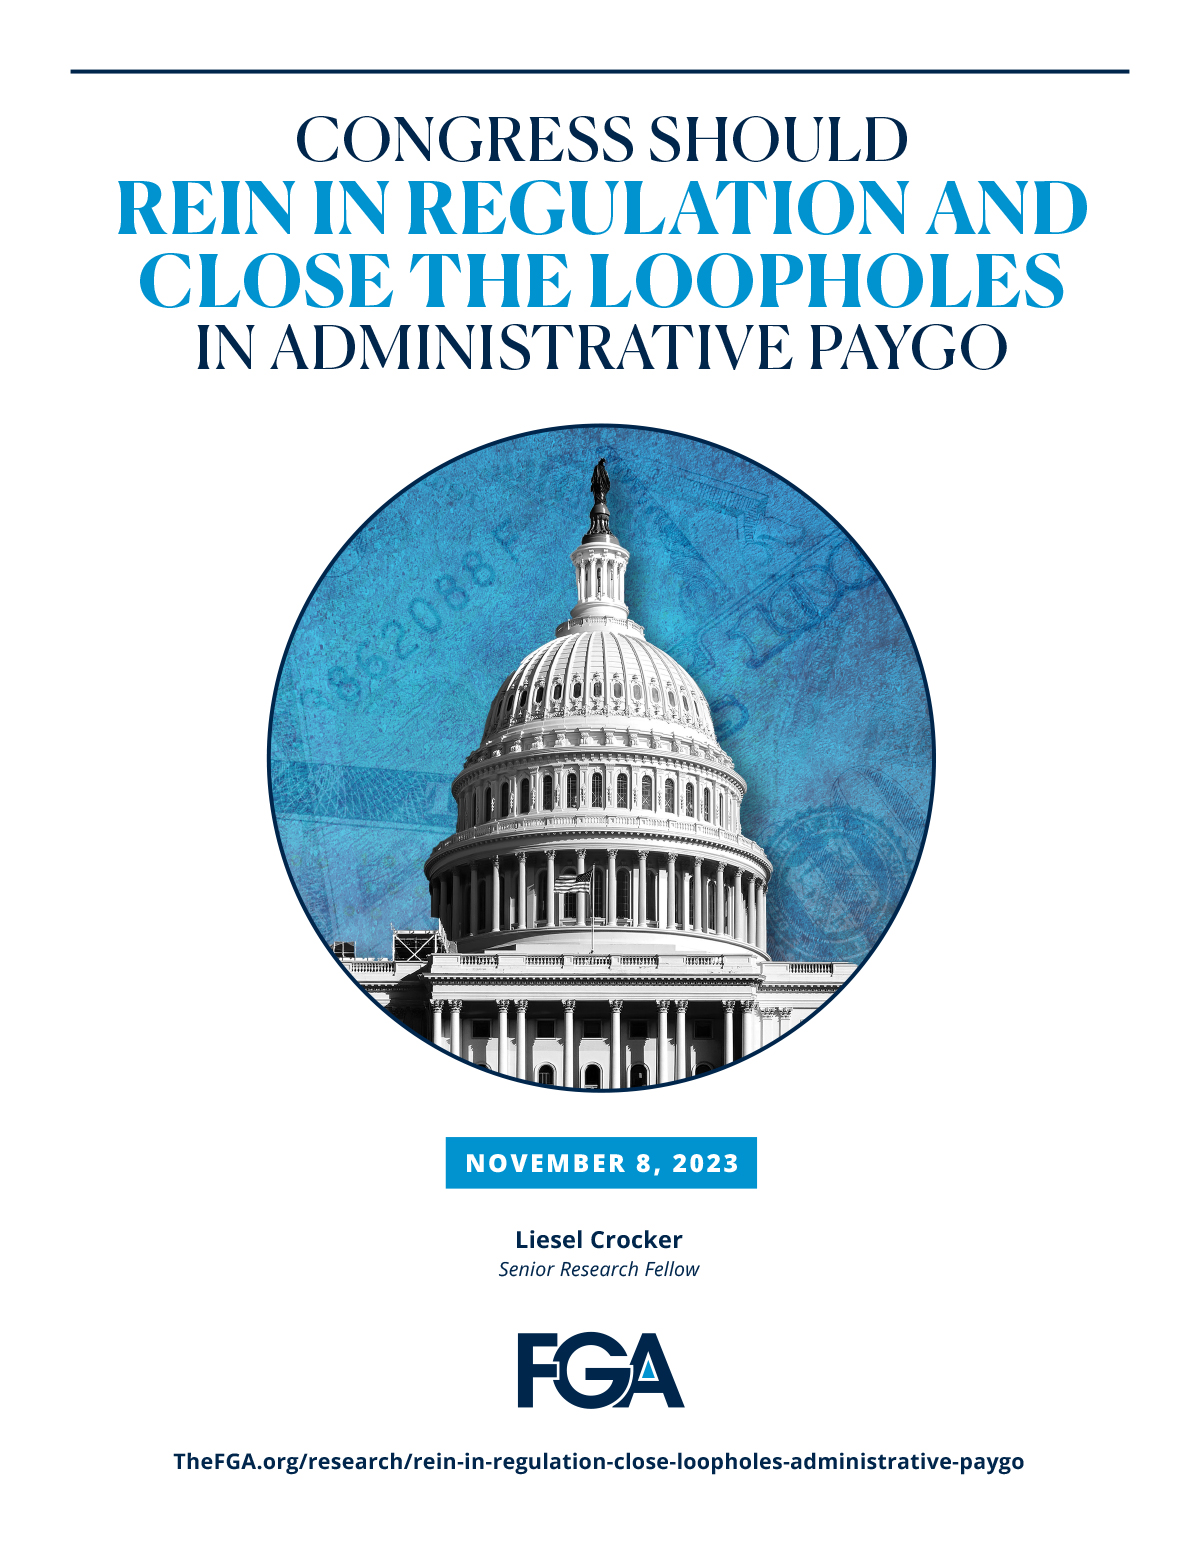 Congress Should Rein in Regulation and Close the Loopholes in Administrative PAYGO